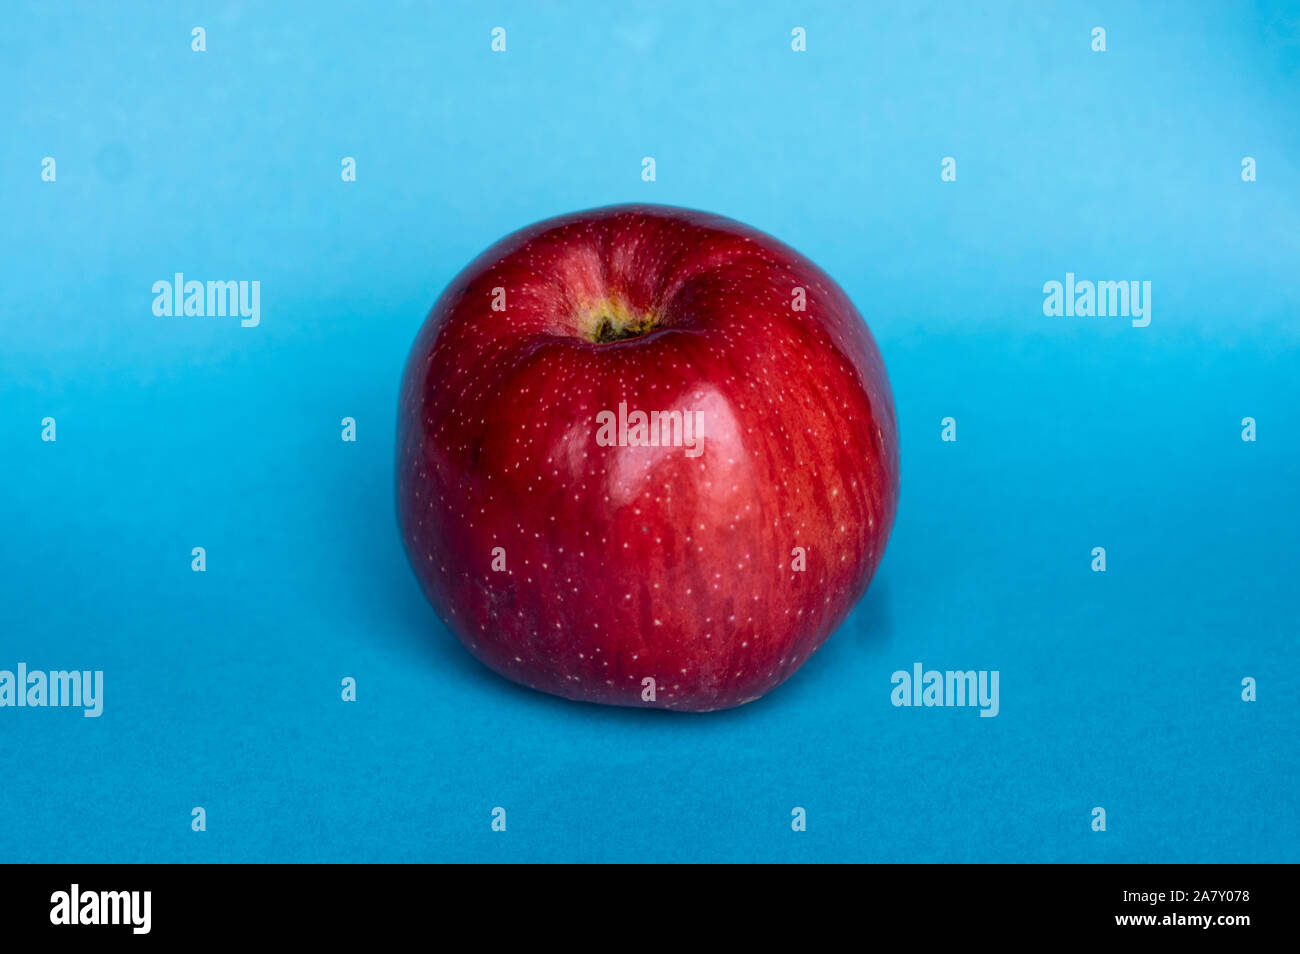 Red appel in kichen on blue background Stock Photo